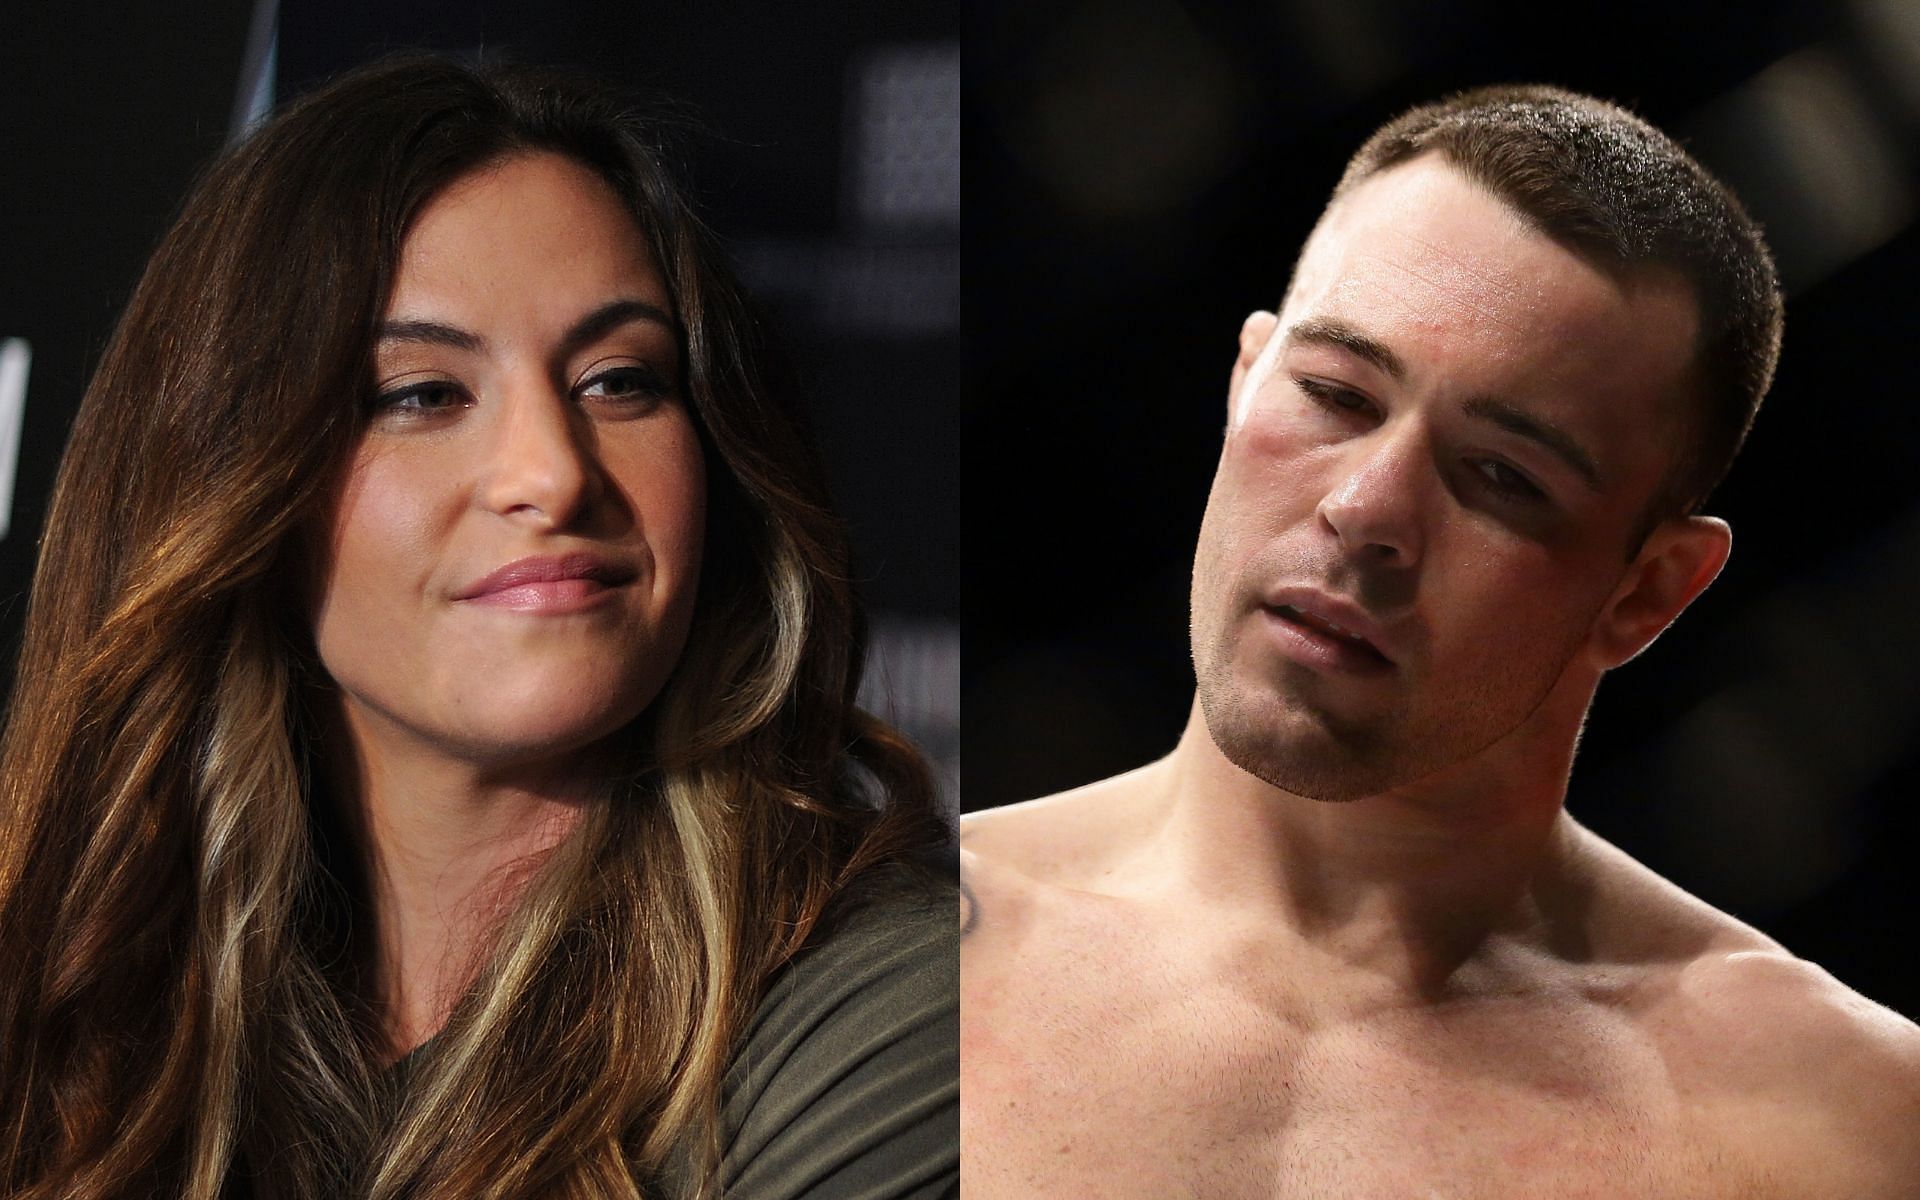 UFC superstars Miesha Tate (left) and Colby Covington (right)